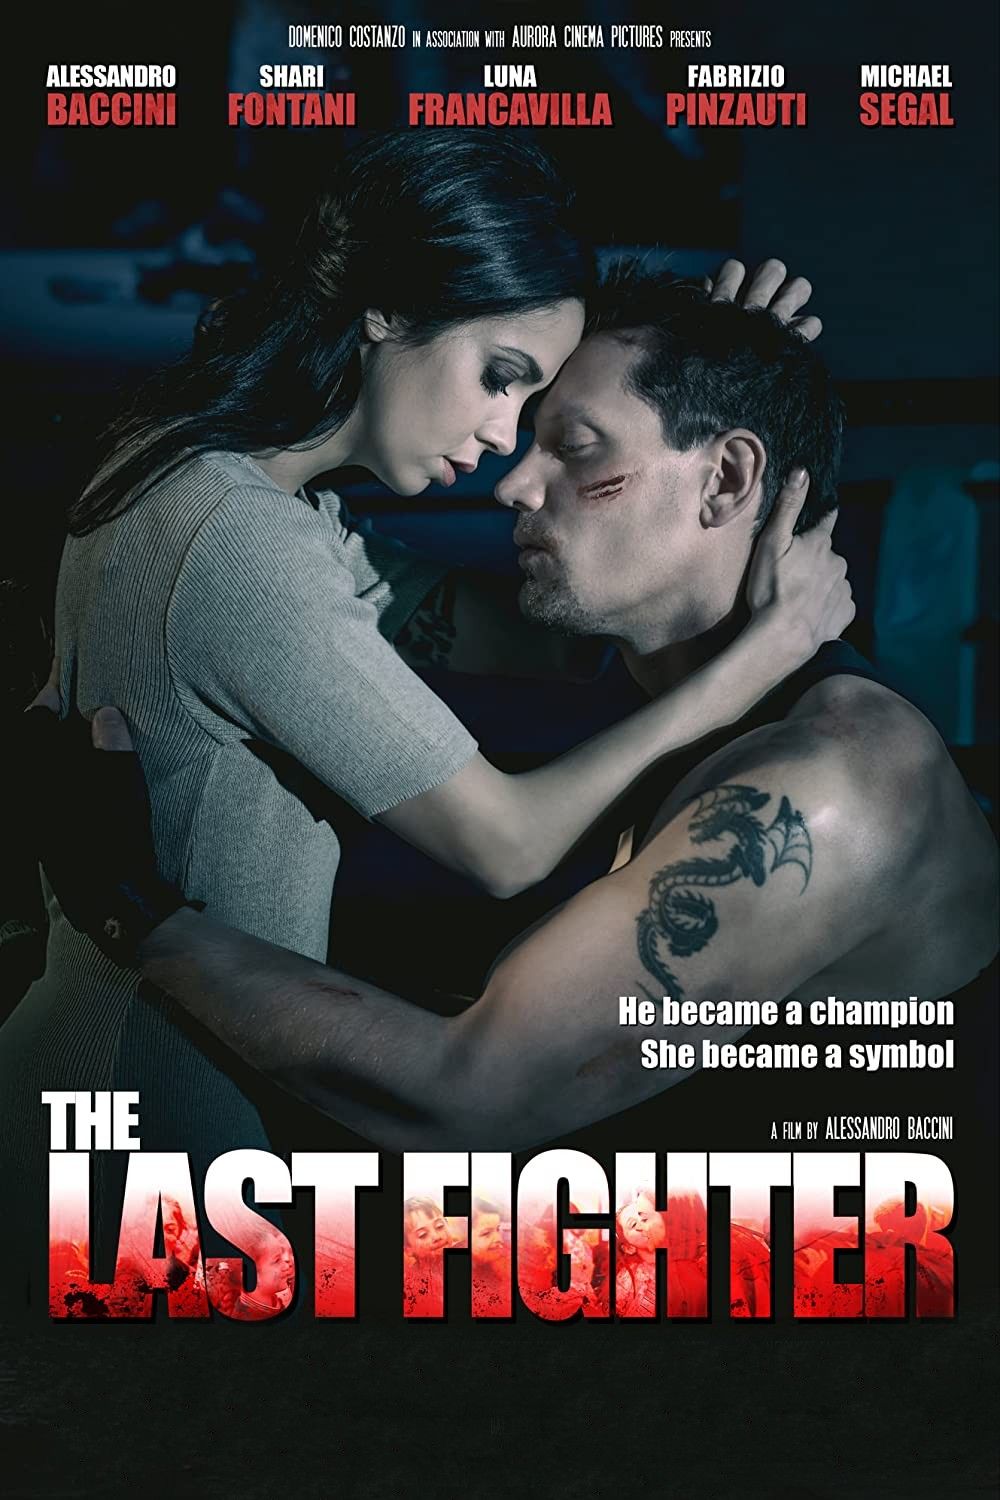 The Last Fighter 2022 Hindi Dubbed BluRay download full movie